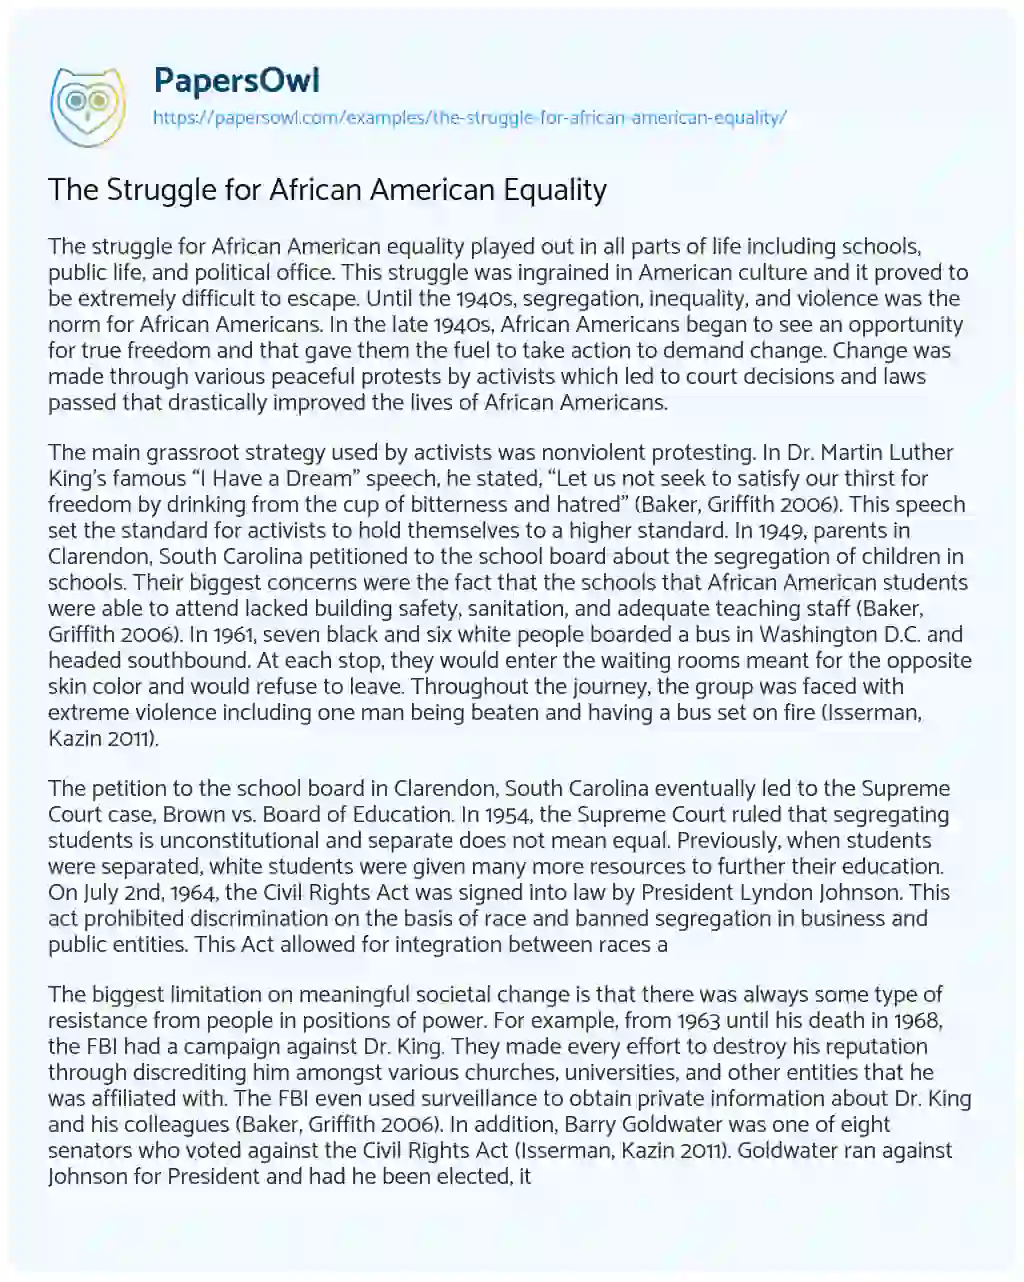 Essay on The Struggle for African American Equality